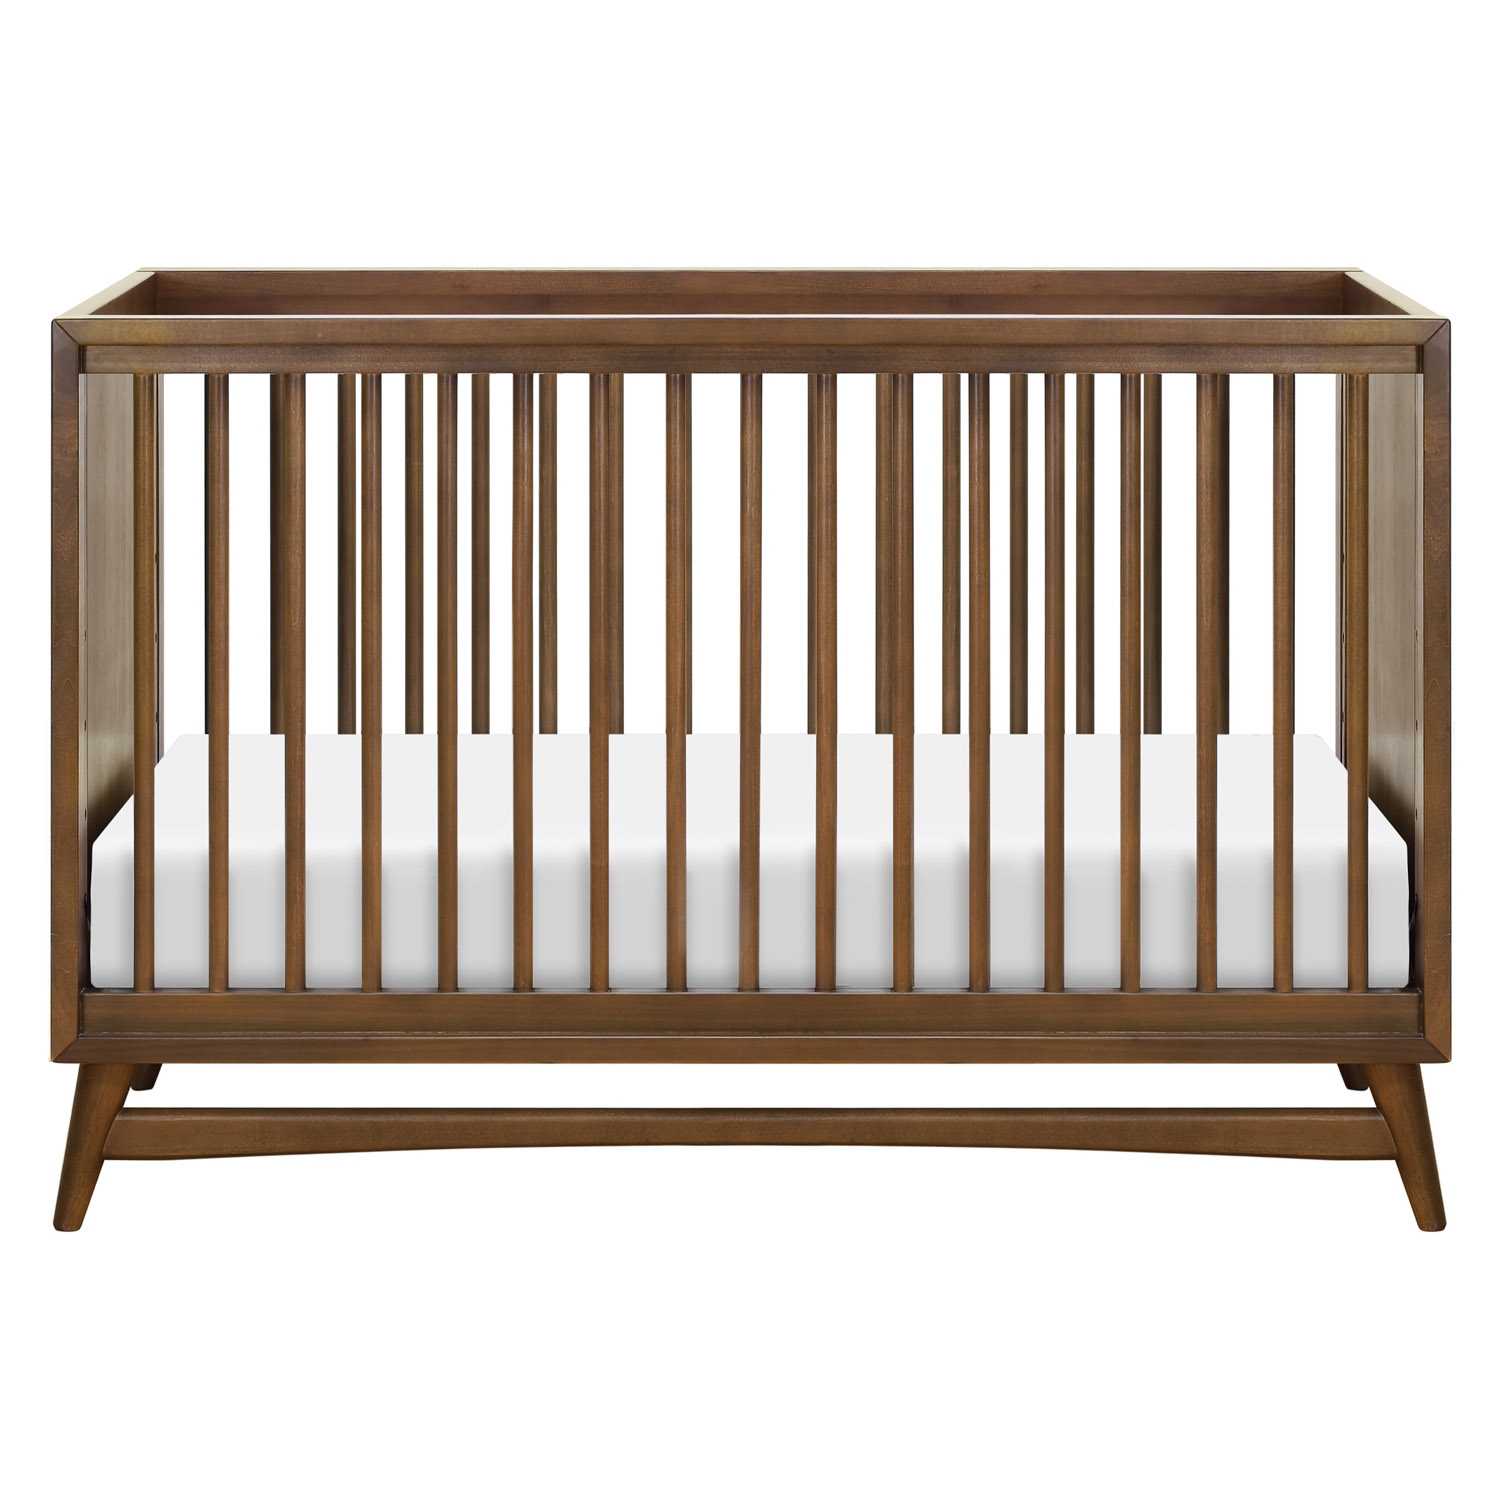 Babyletto Peggy Mid Century Modern Brown Wood Convertible Crib - Image 1